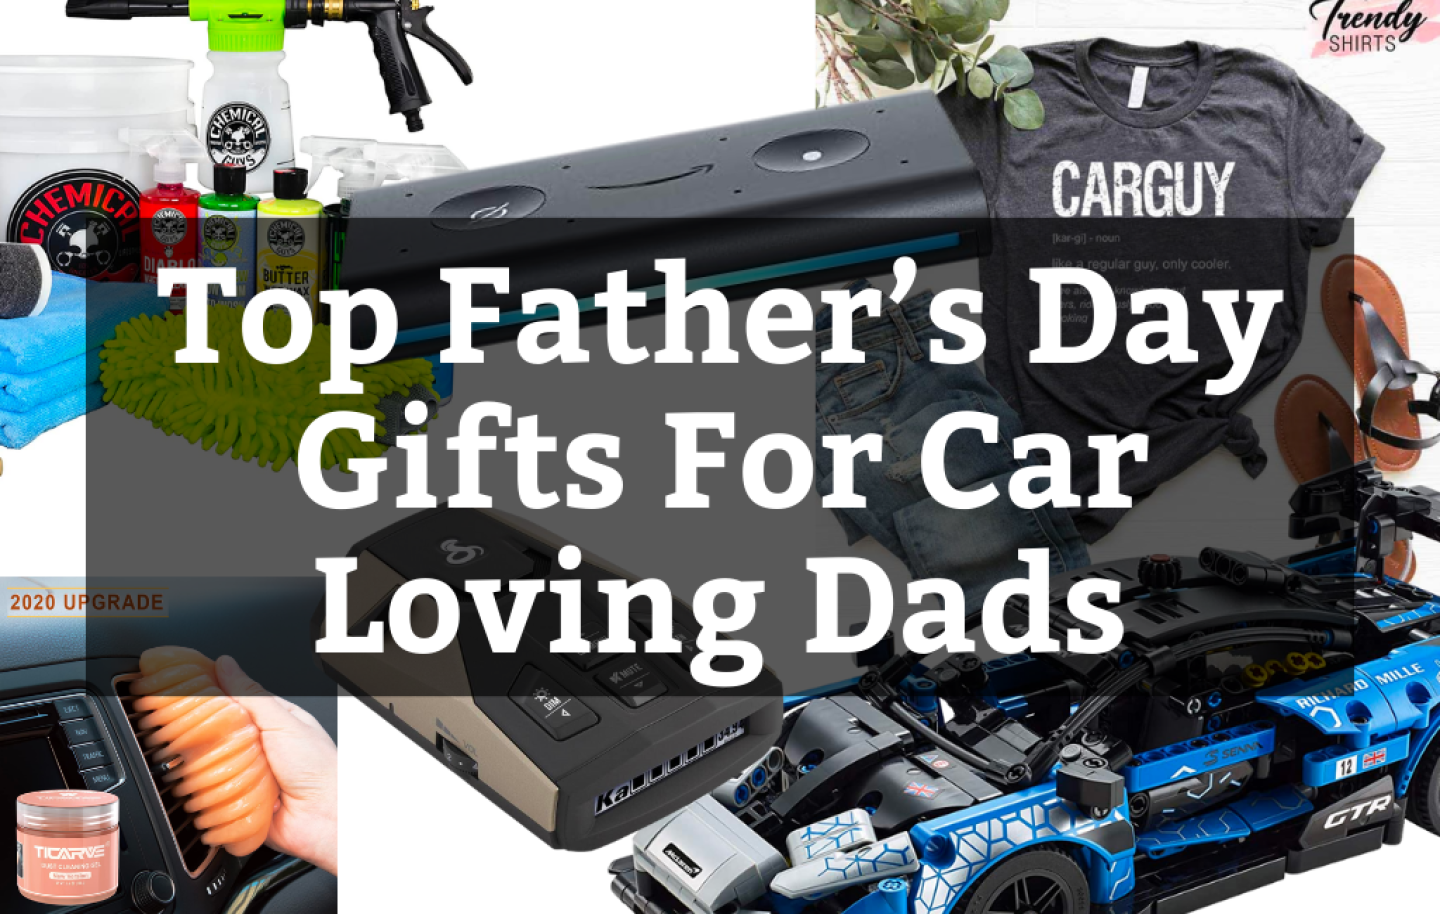 Top Father’s Day Gifts For Car Loving Dads